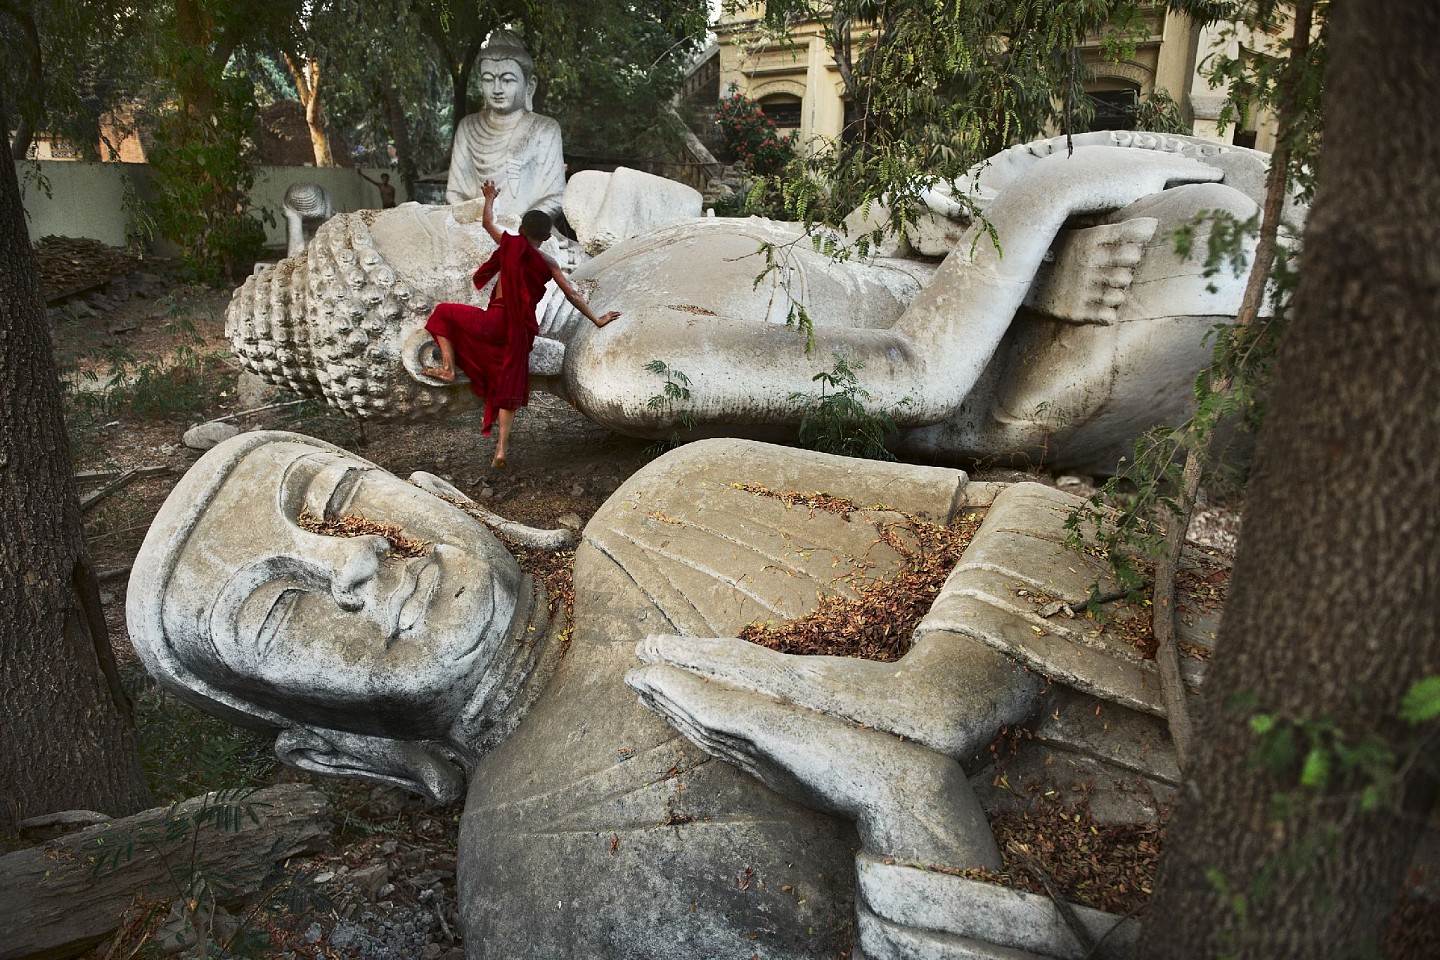 Steve McCurry, Monk Climbs Buddha Statues, 2010
FujiFlex Crystal Archive Print
Price/Size on request